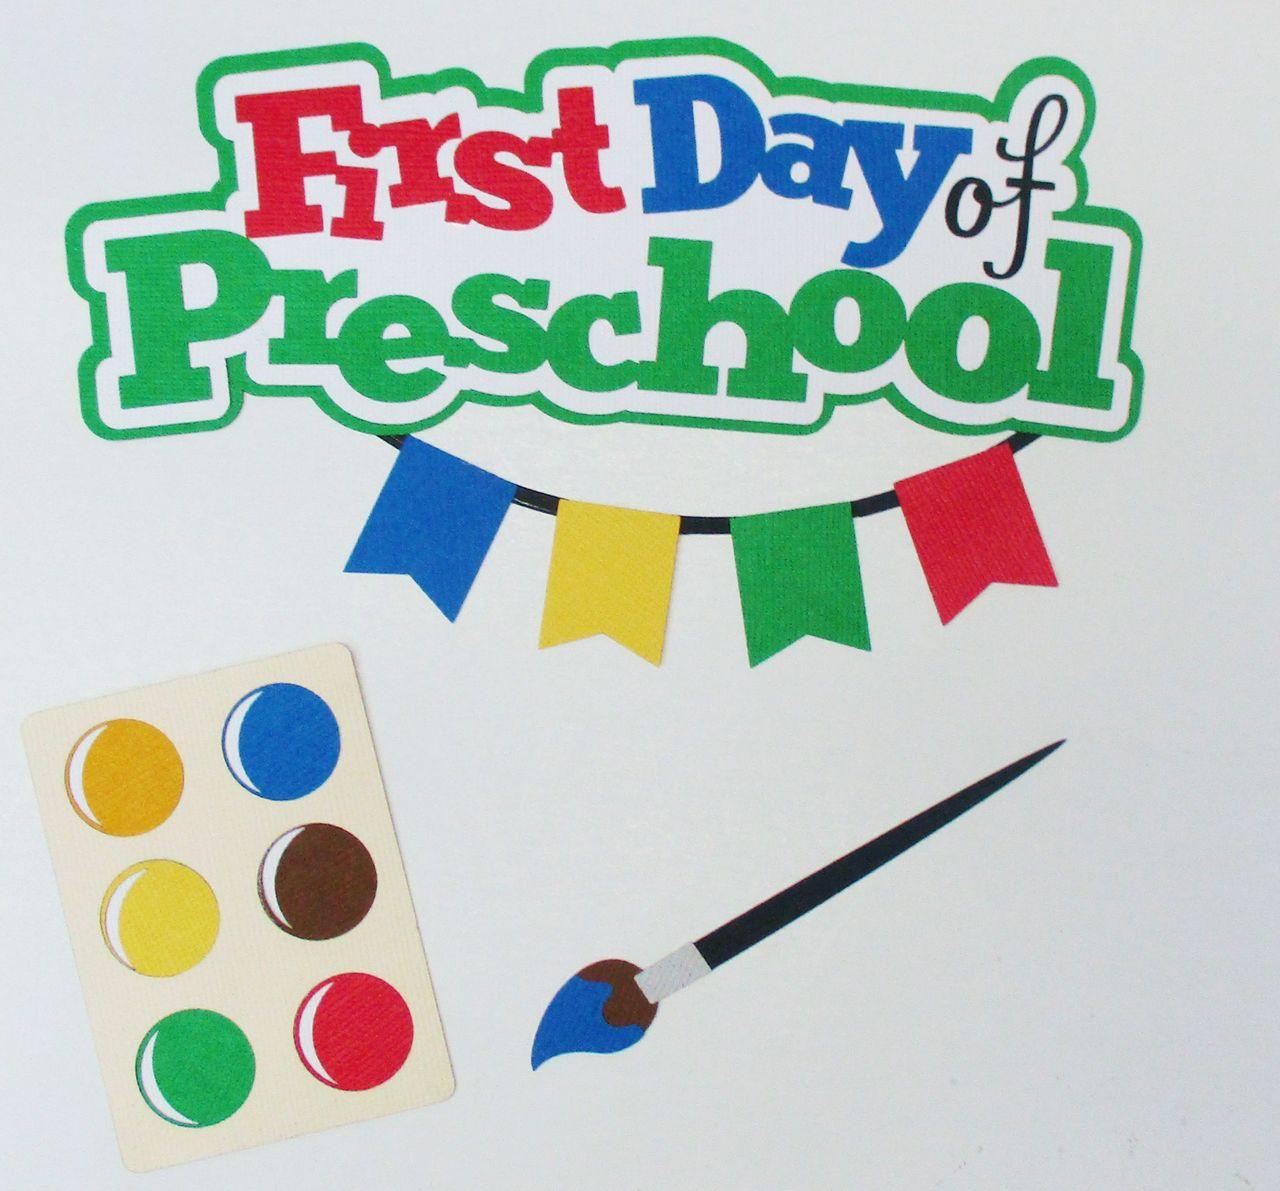 First Day of Preschool 2.5 x 6 Title and Paint Set 3-Piece Set Fully-Assembled Laser Cut Scrapbook Embellishment by SSC Laser Designs